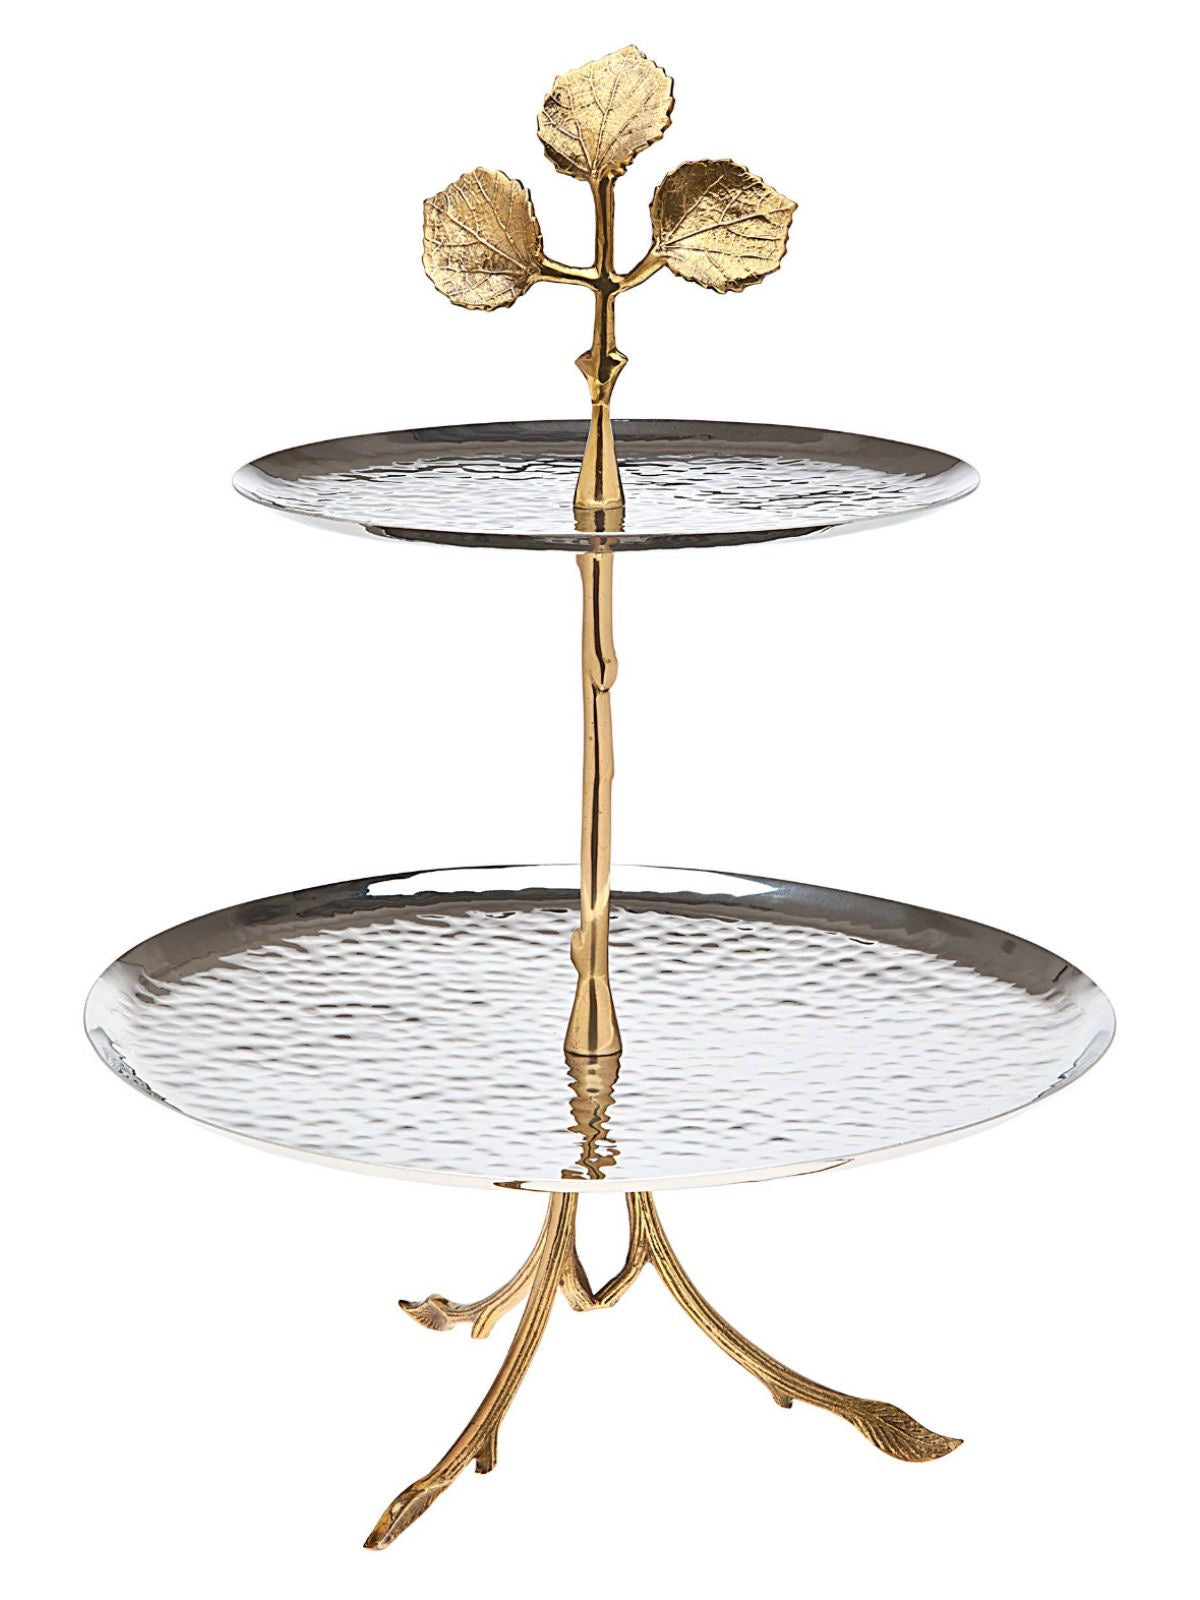 This breathtaking Stainless Steel 2 tier Server is beautifully designed with Brass thin bark-like stems and tipped with 3 dainty leaves! Each silverplated plate is hammered to give it the finishing touch of elegance.  